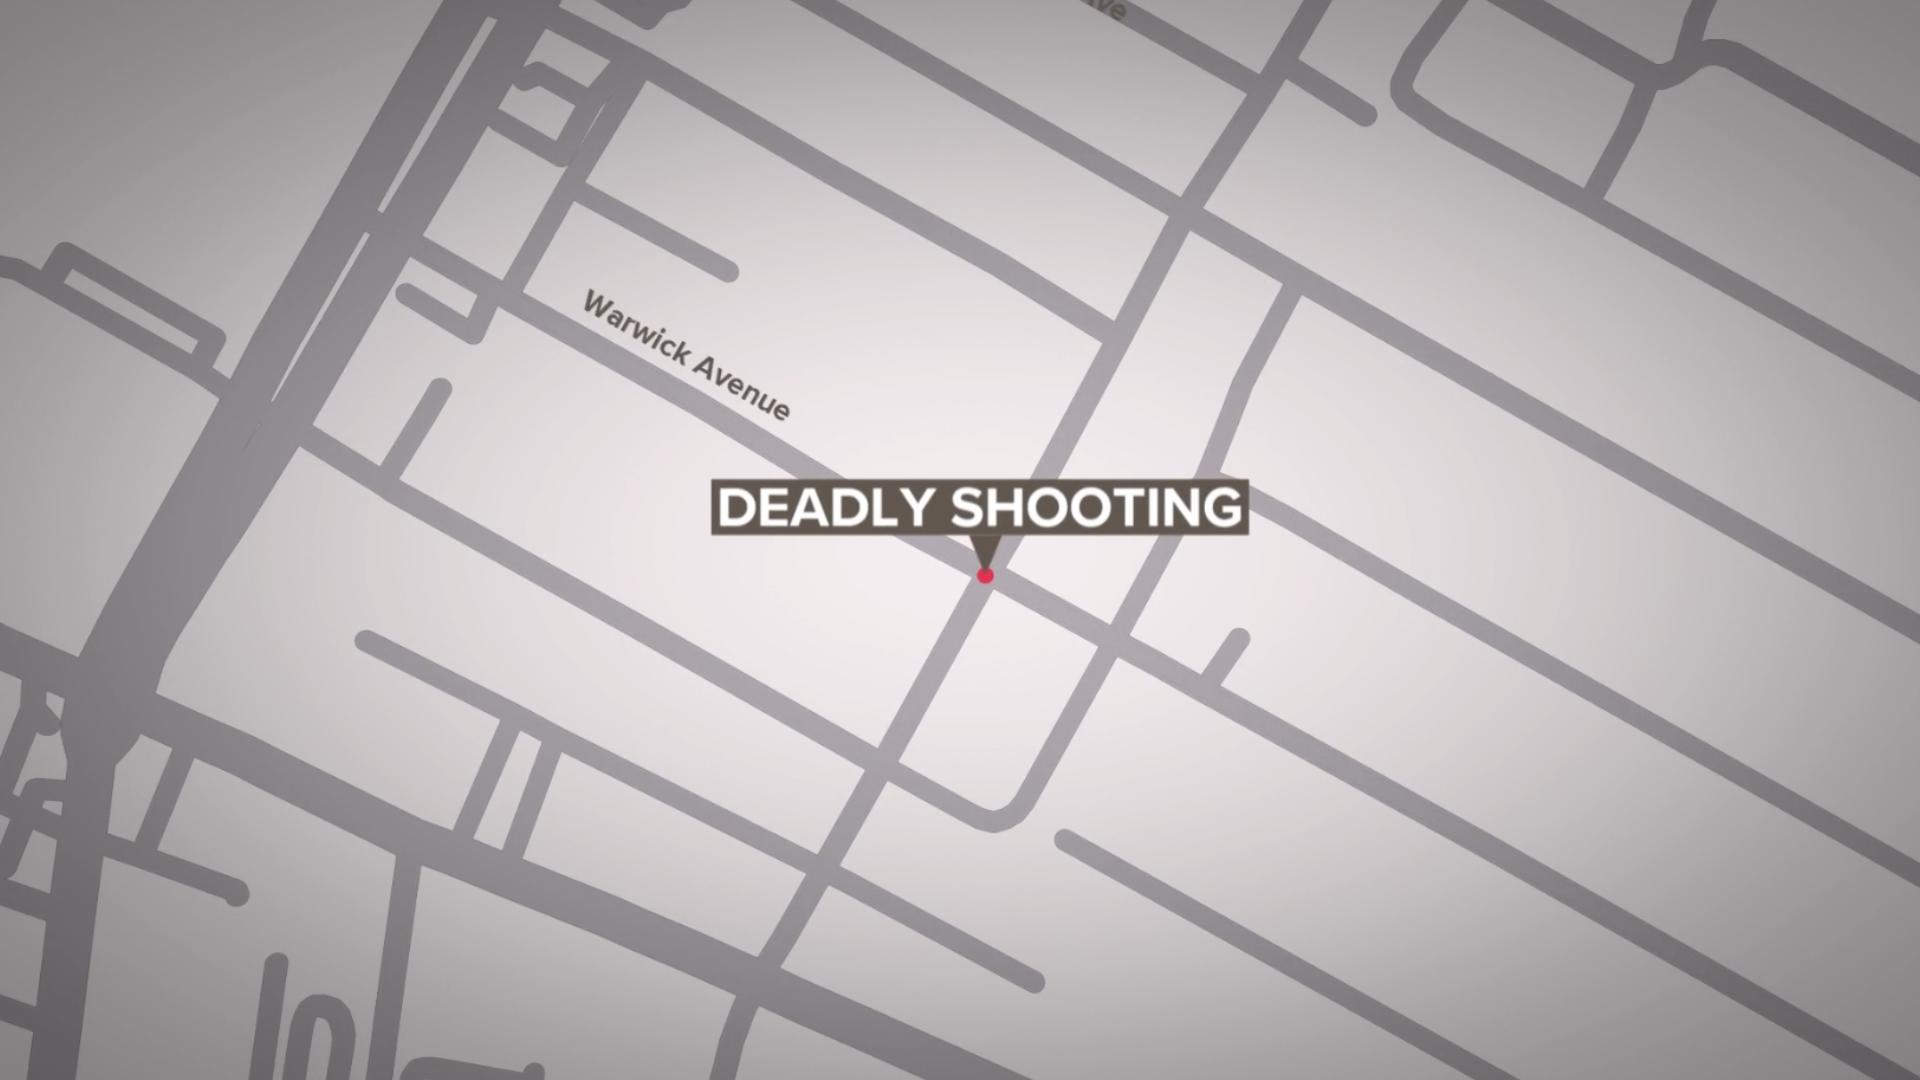 One person is dead after a shooting involving an off-duty officer, St. Louis police say. A woman was pronounced dead, according to police.